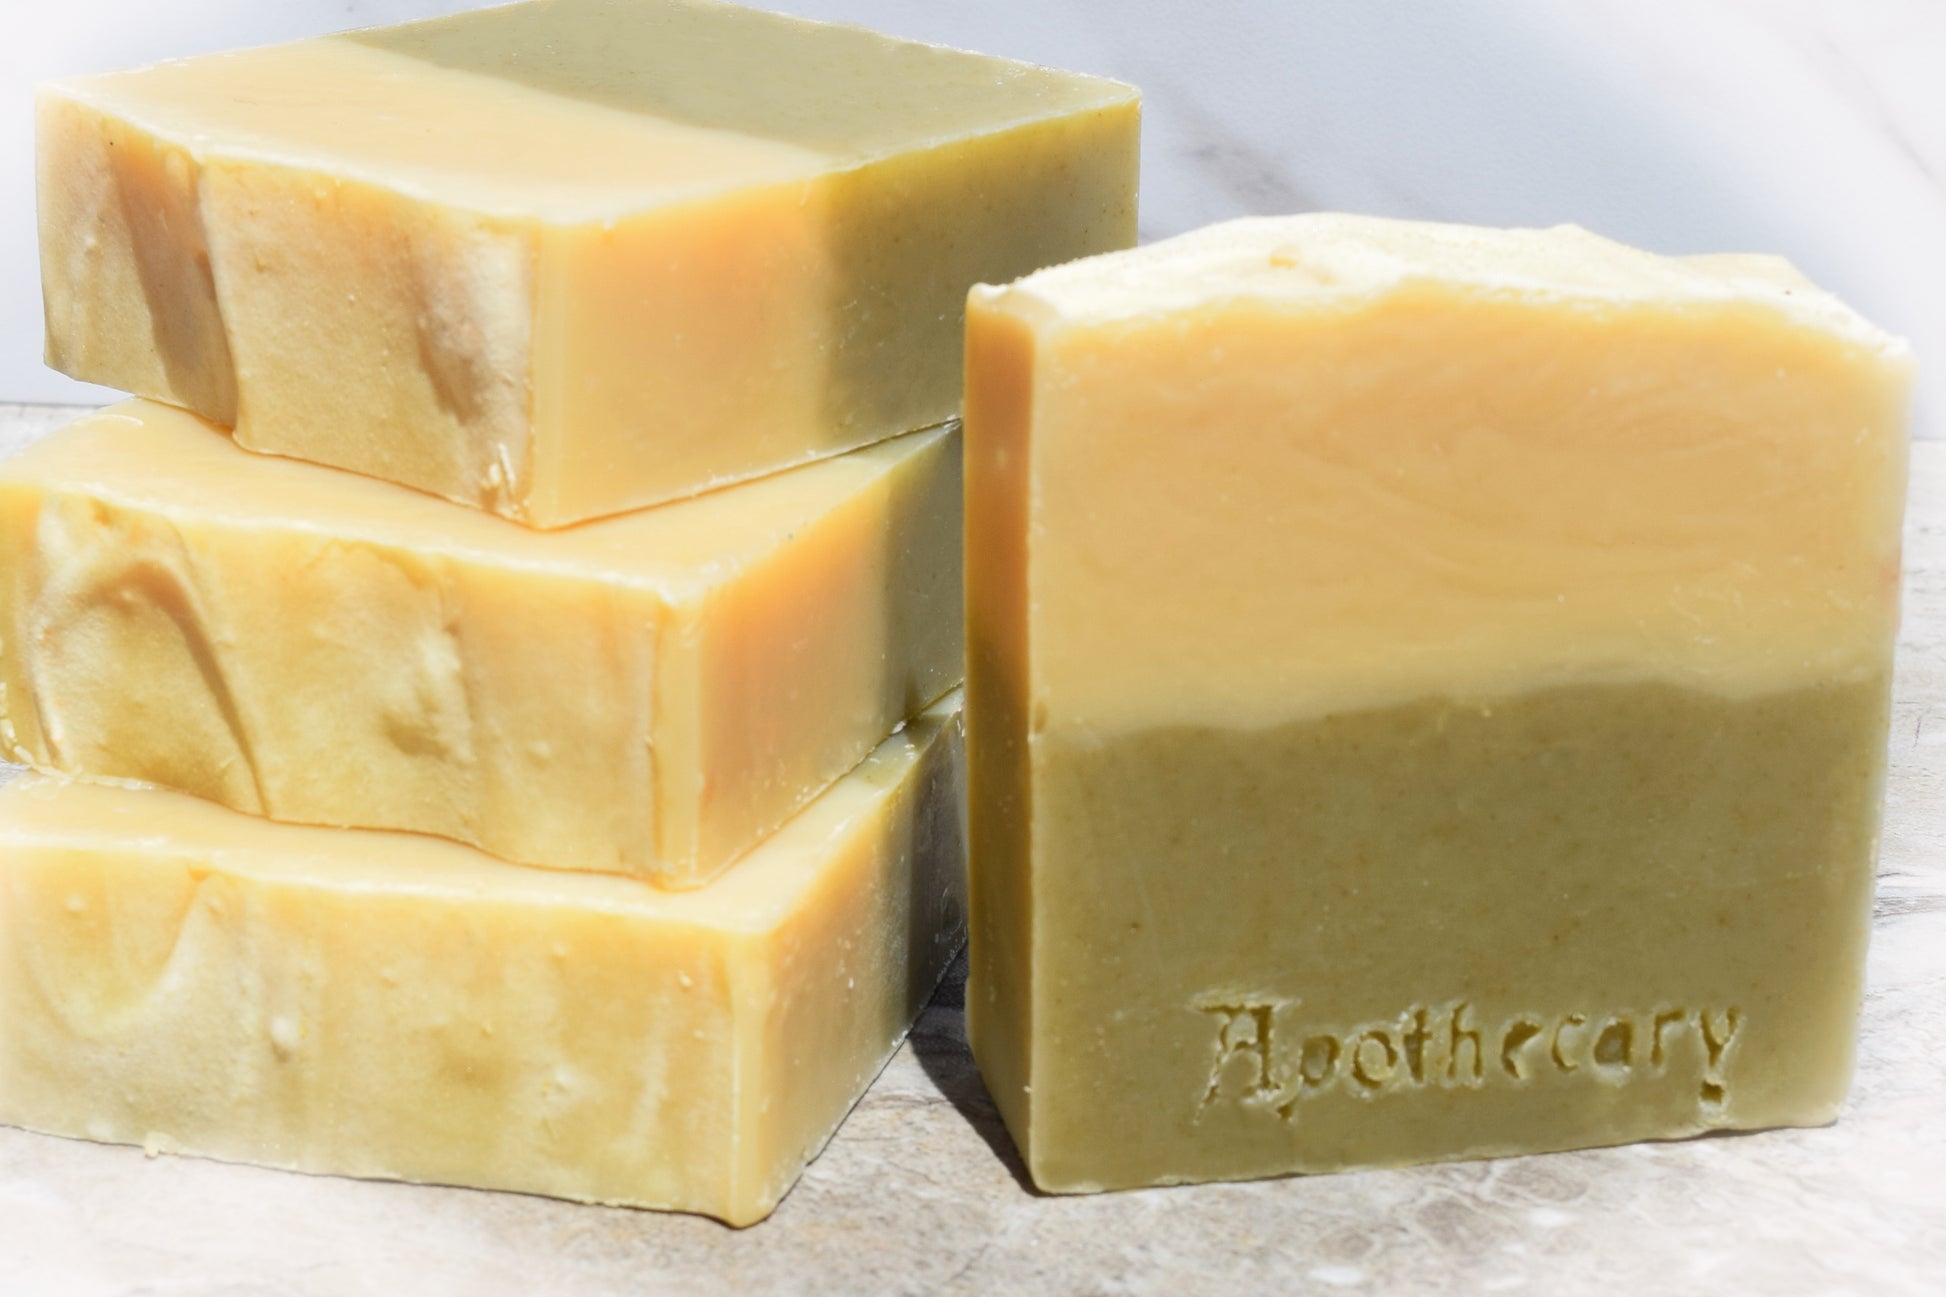 Green and cream soap scented with vetiver and bergamot